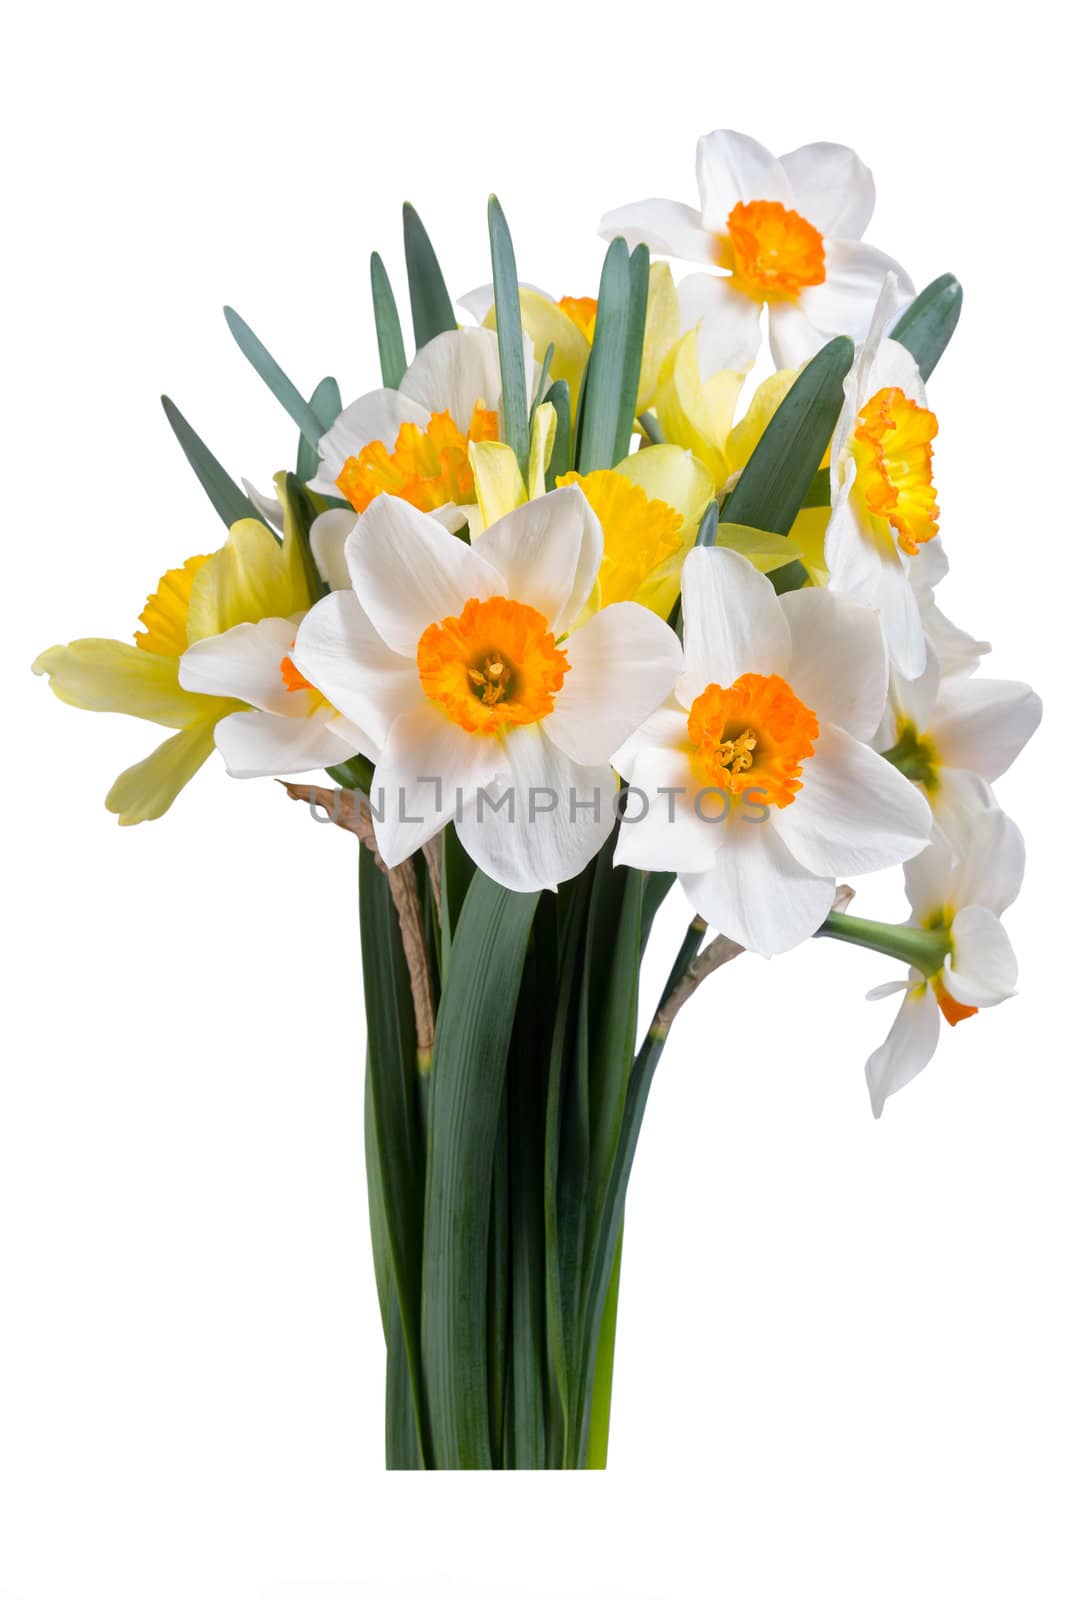 Beautyful bouquet of yellow and white narcissus with leaves isolated on a white background